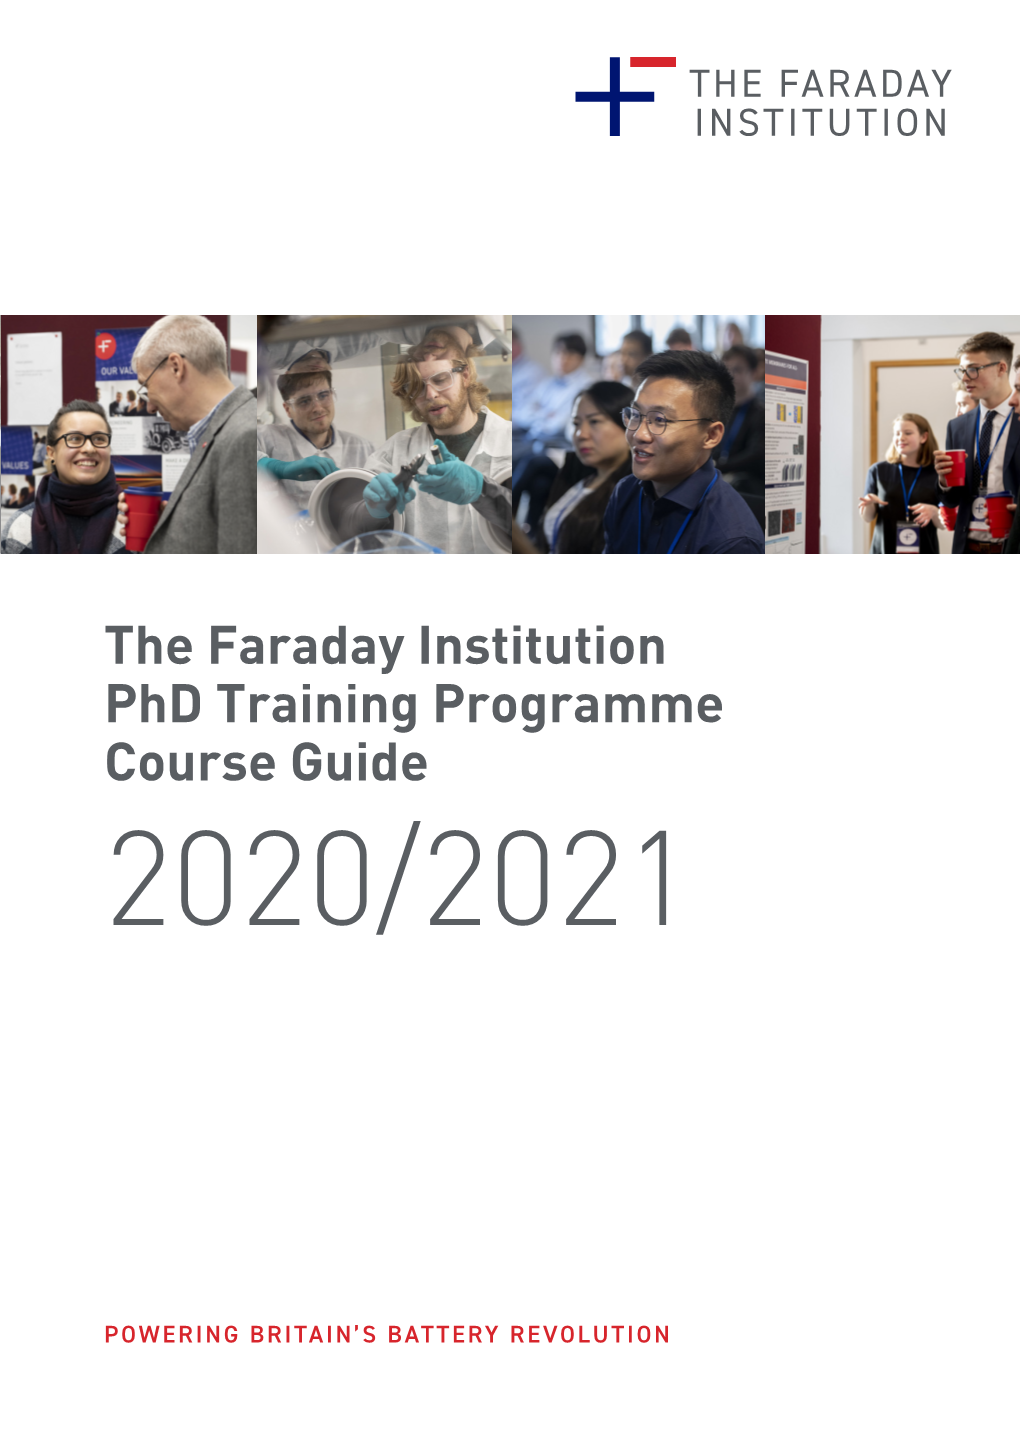 The Faraday Institution Phd Training Programme Course Guide 2020/2021